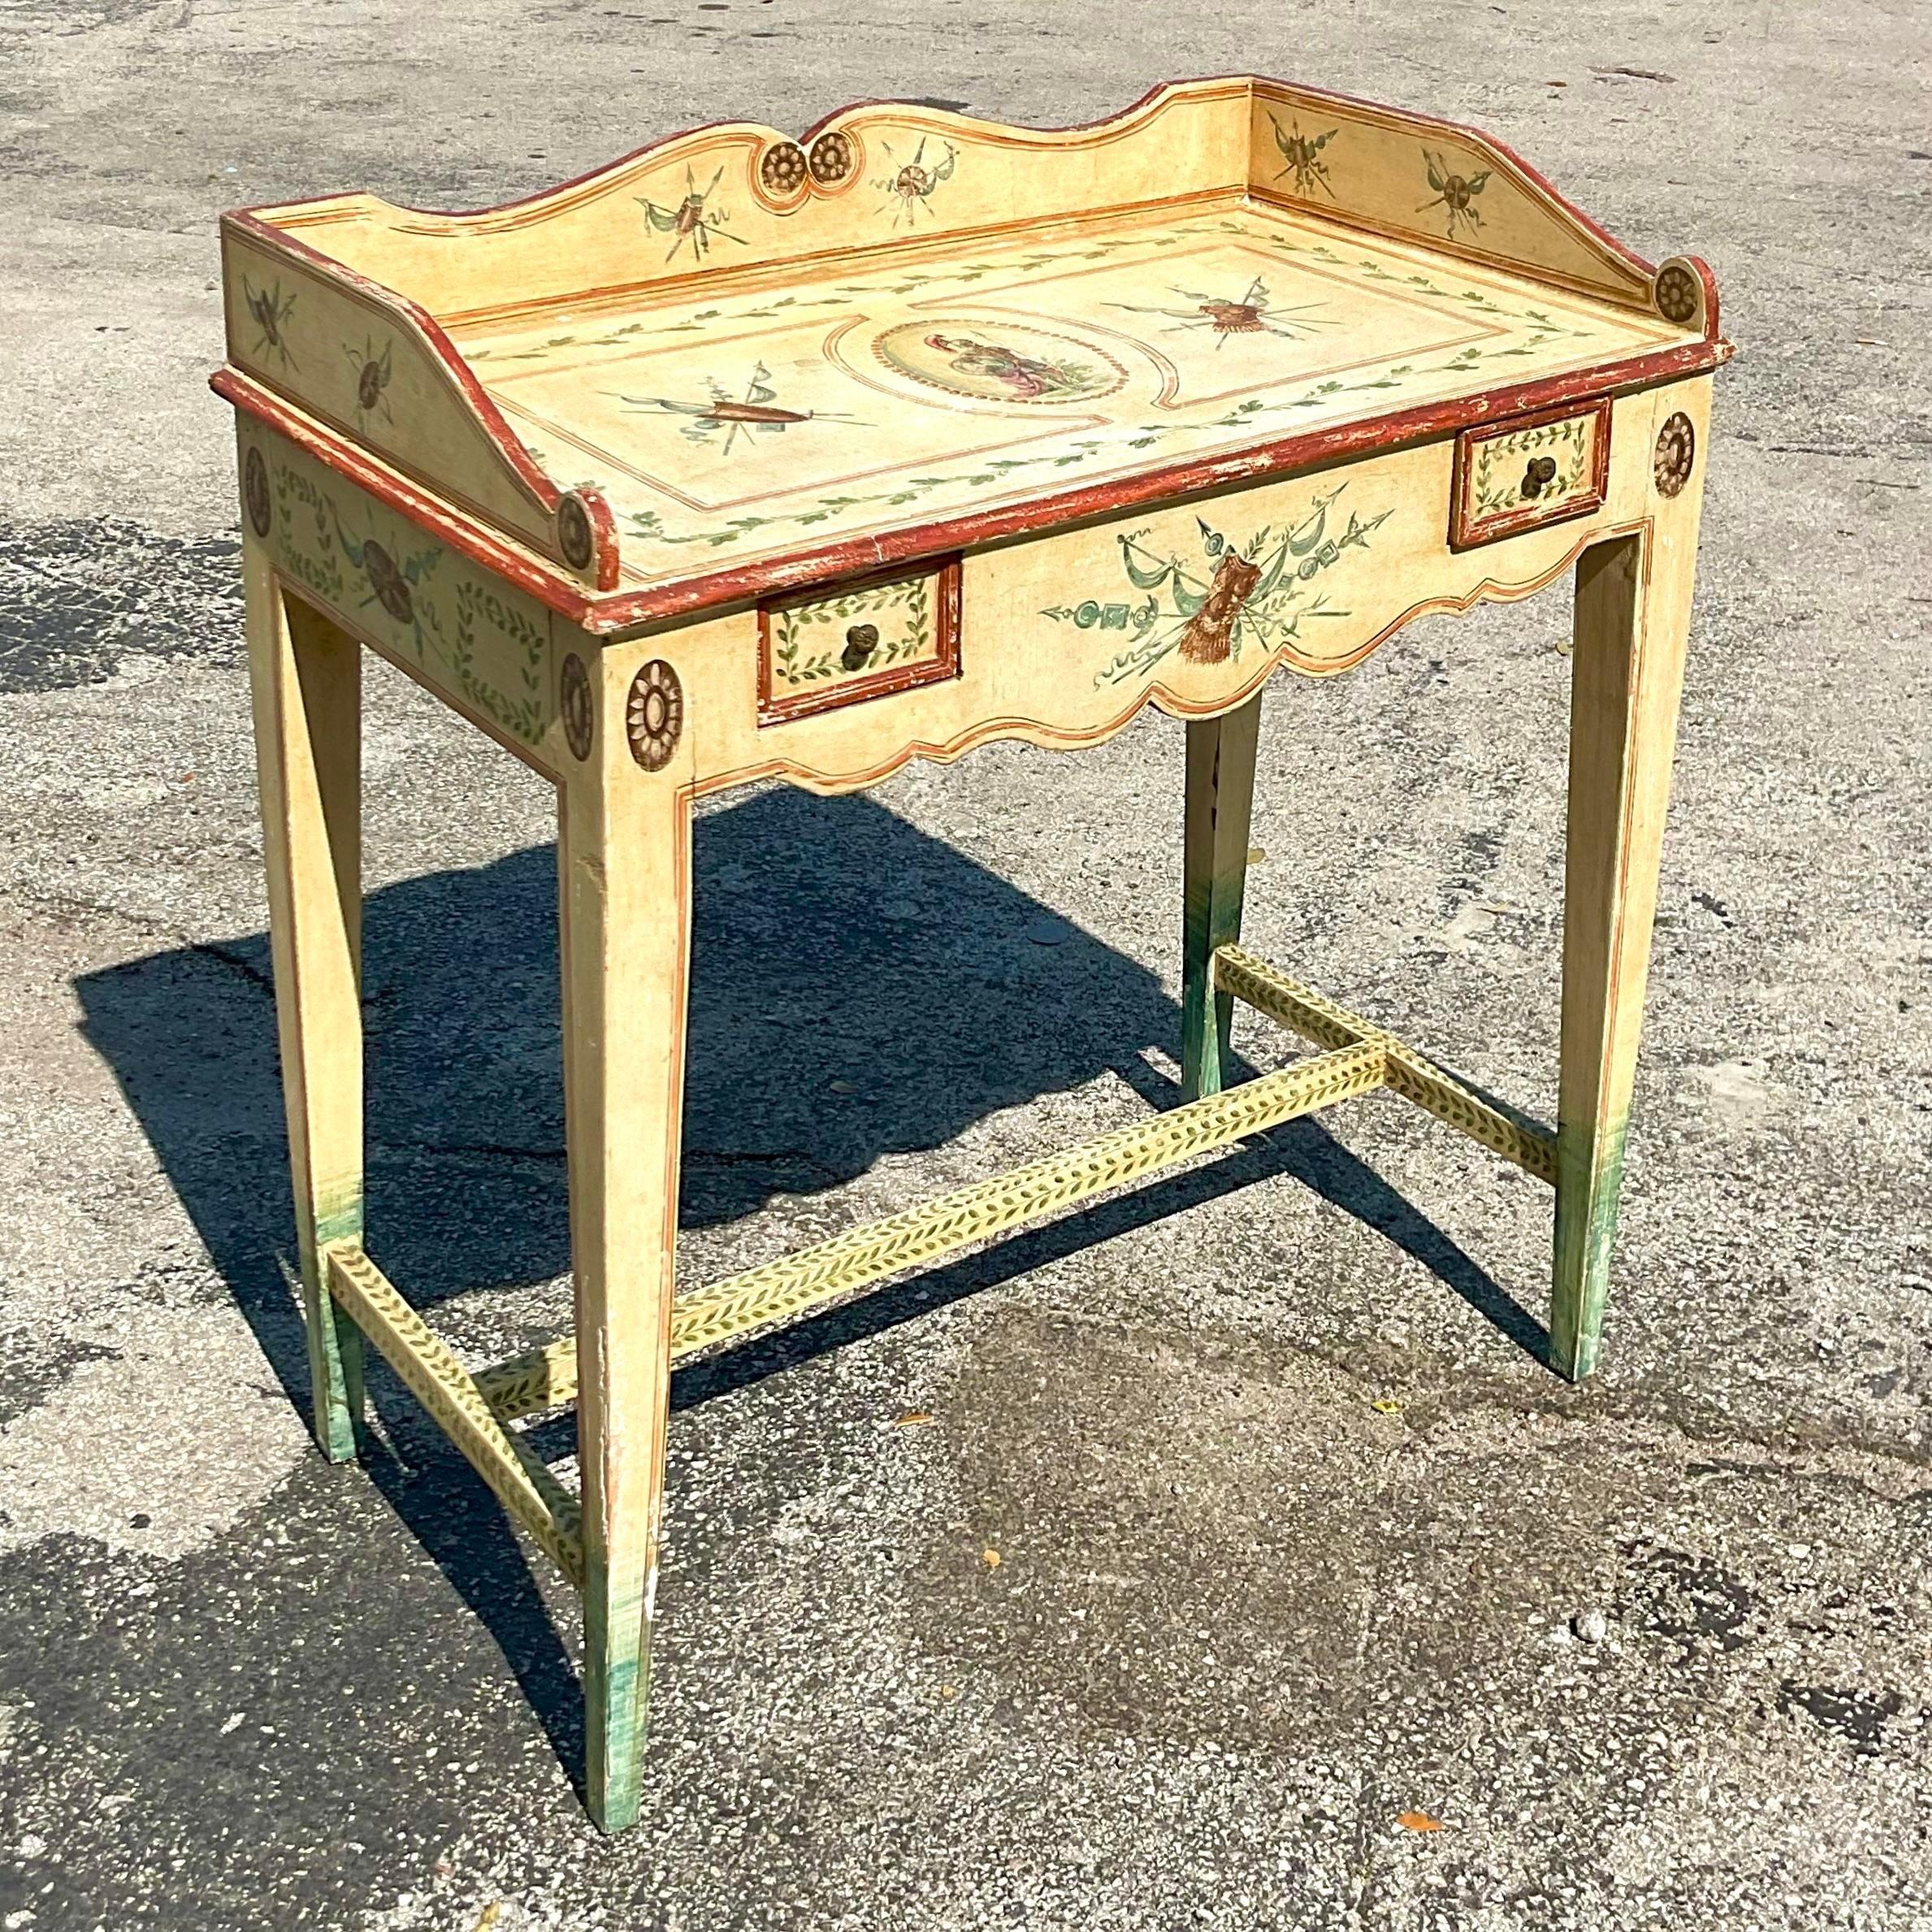 A fantastic Vintage Regency writing desk. Beautiful hand painted detail with scenes of gladiators. Passed down through three generations in one family. A real collectors piece. Acquired from a Palm Beach estate.